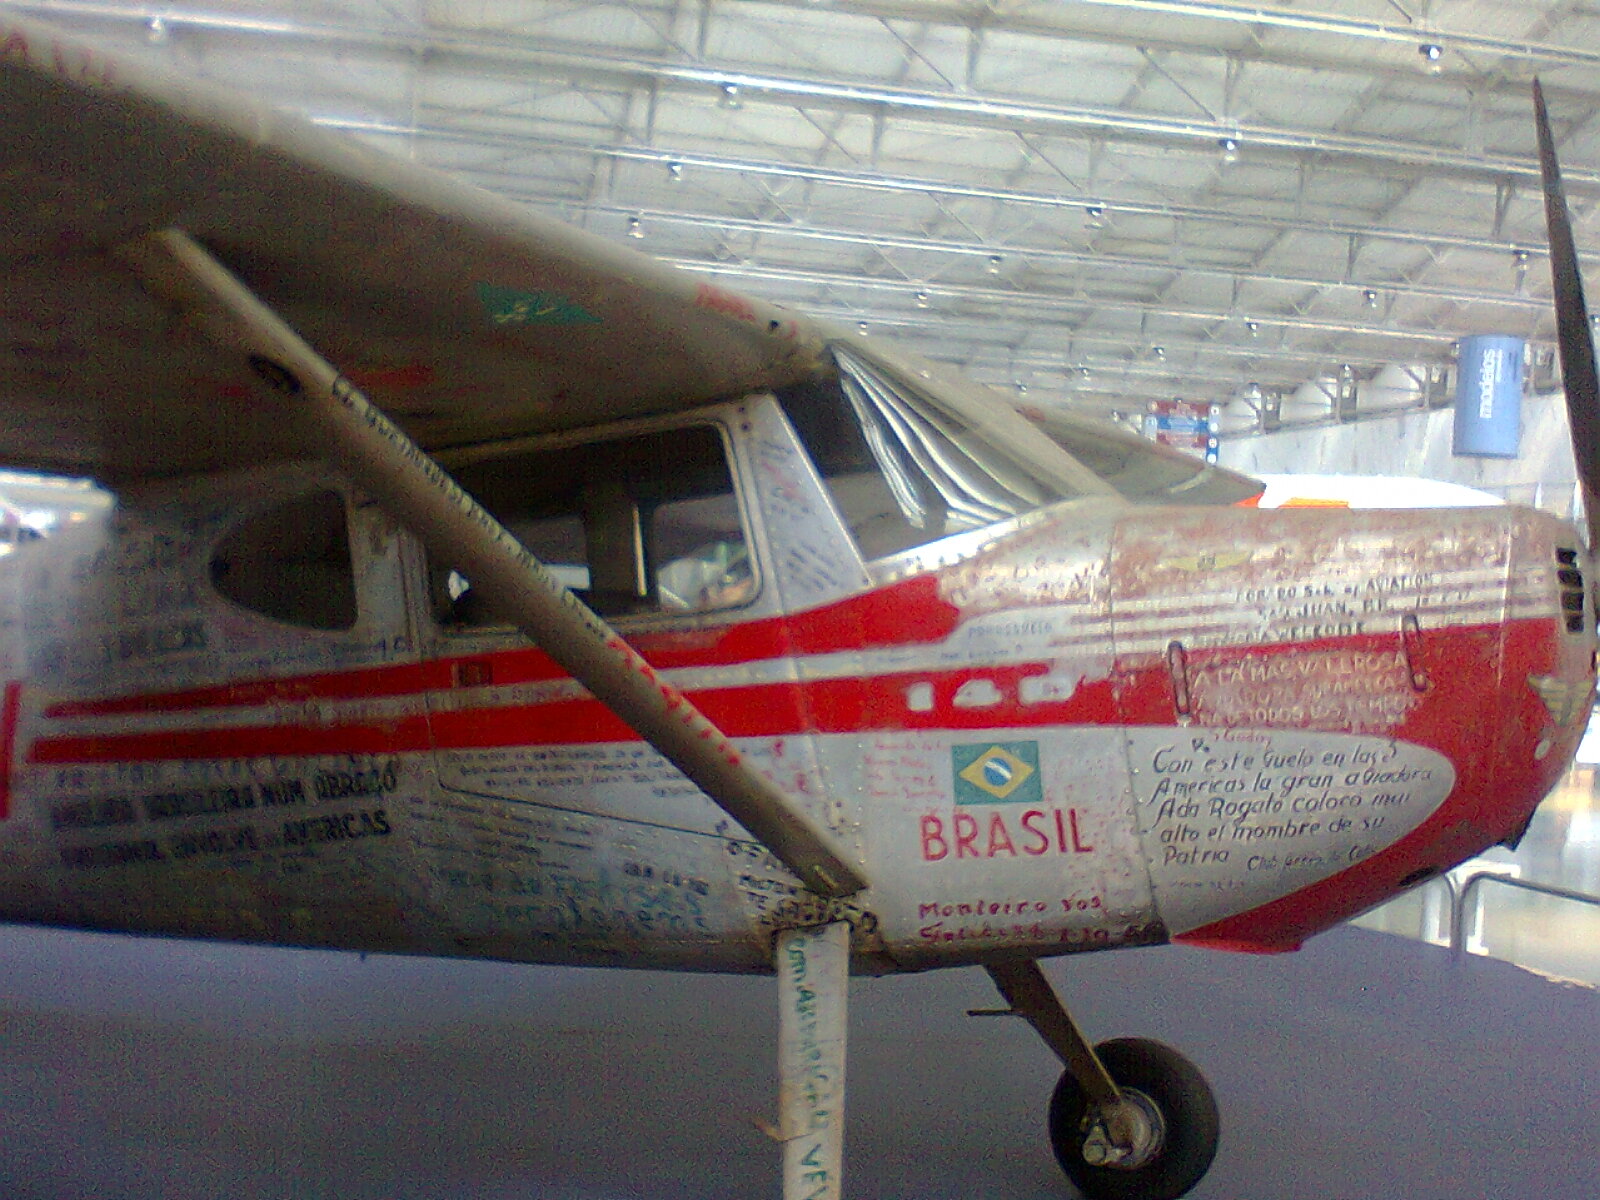 A Cessna used by a Brazillian woman to fly over South America (I guess).